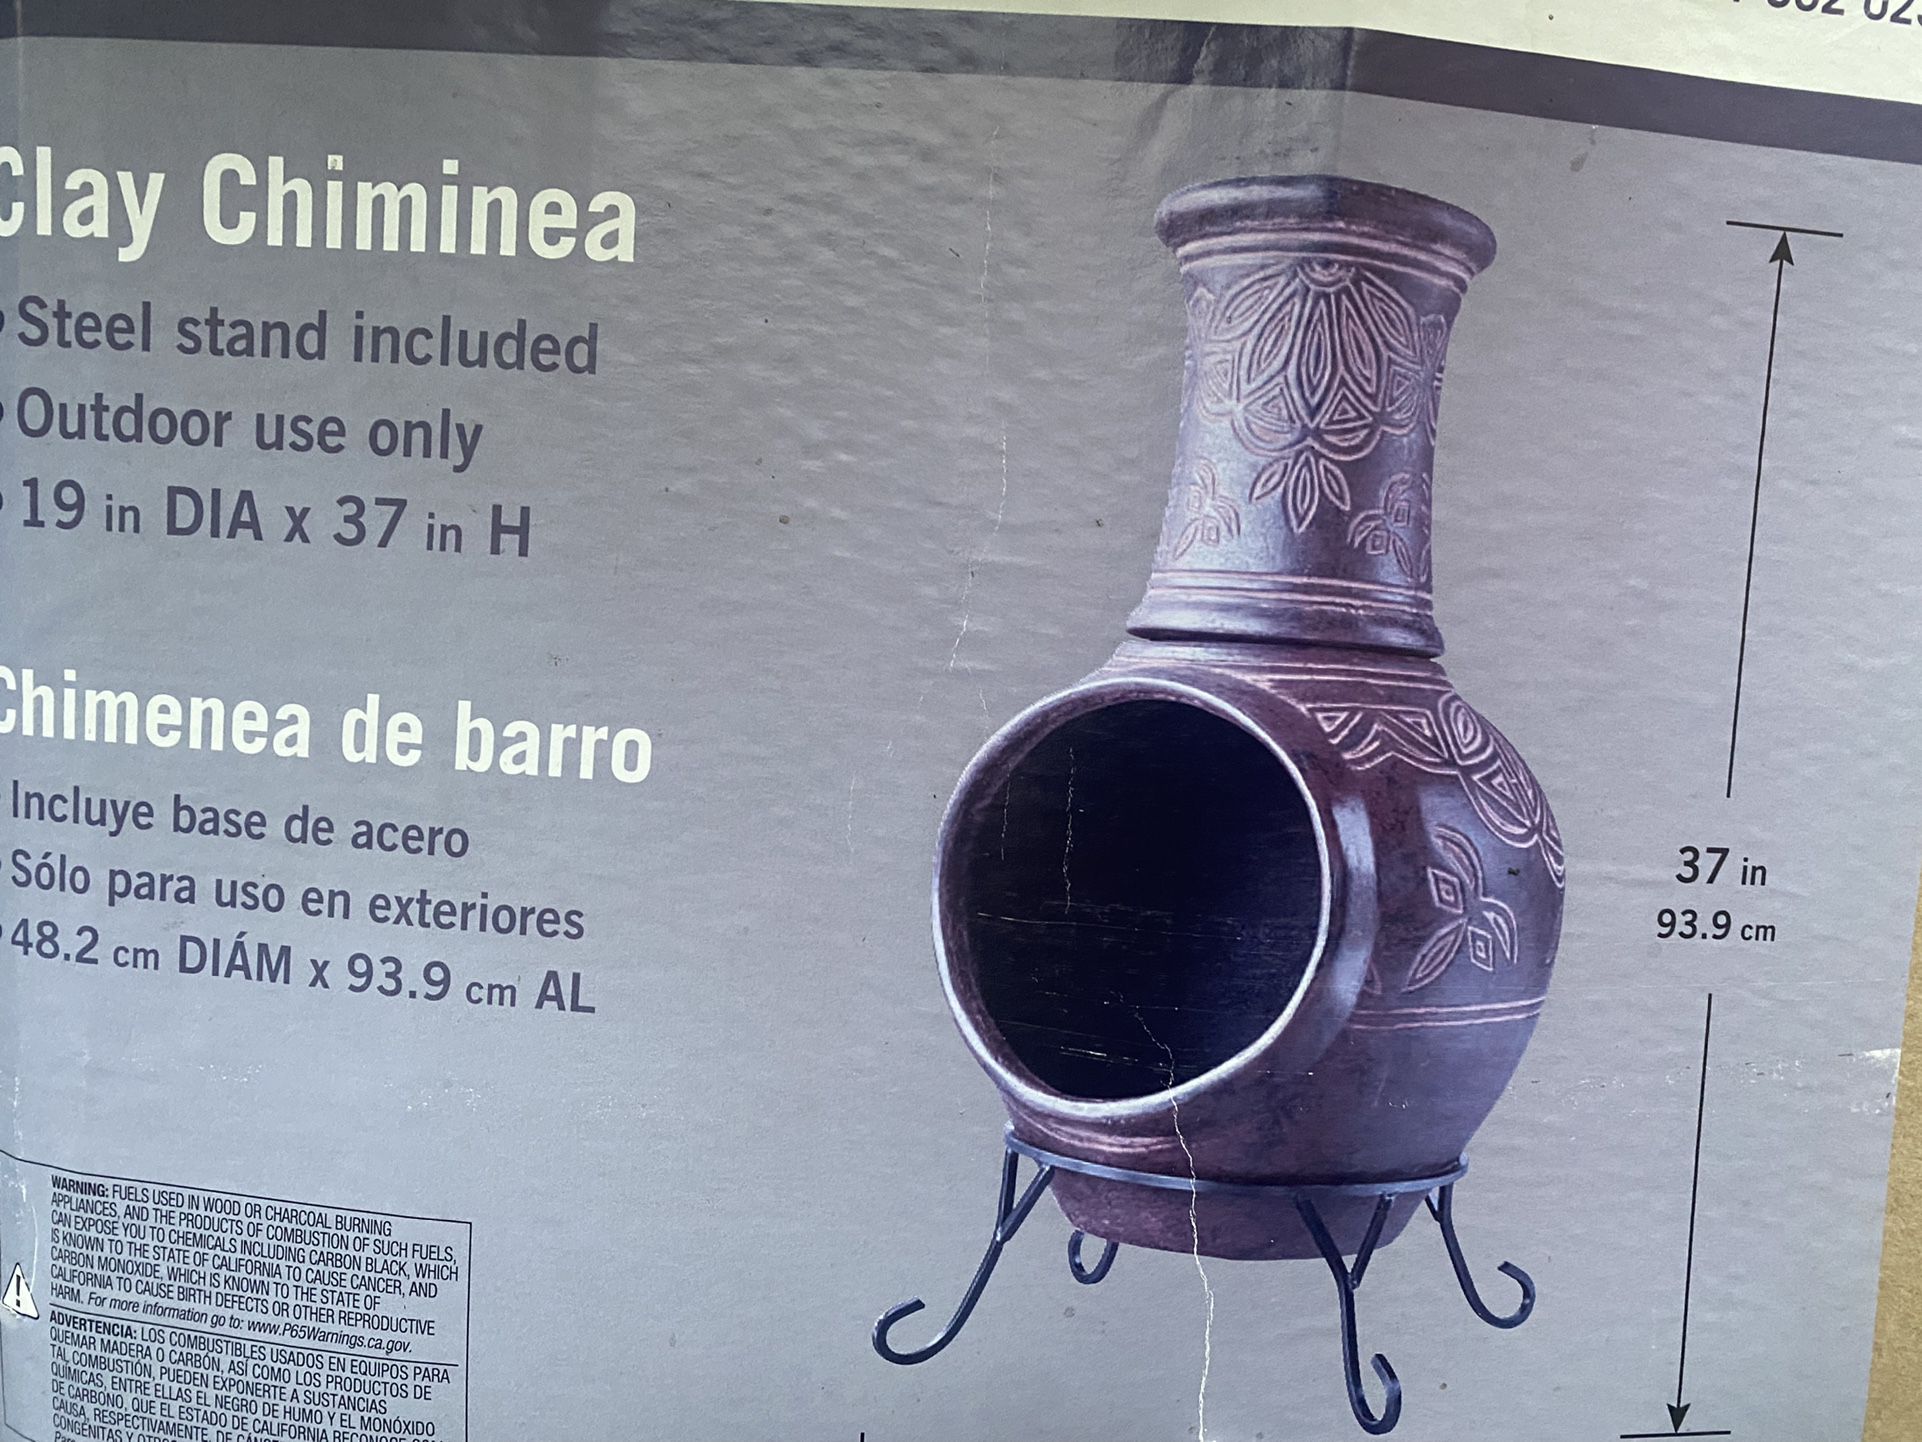 New Clay Chiminea For Porch Or Backyard Fire Pit 